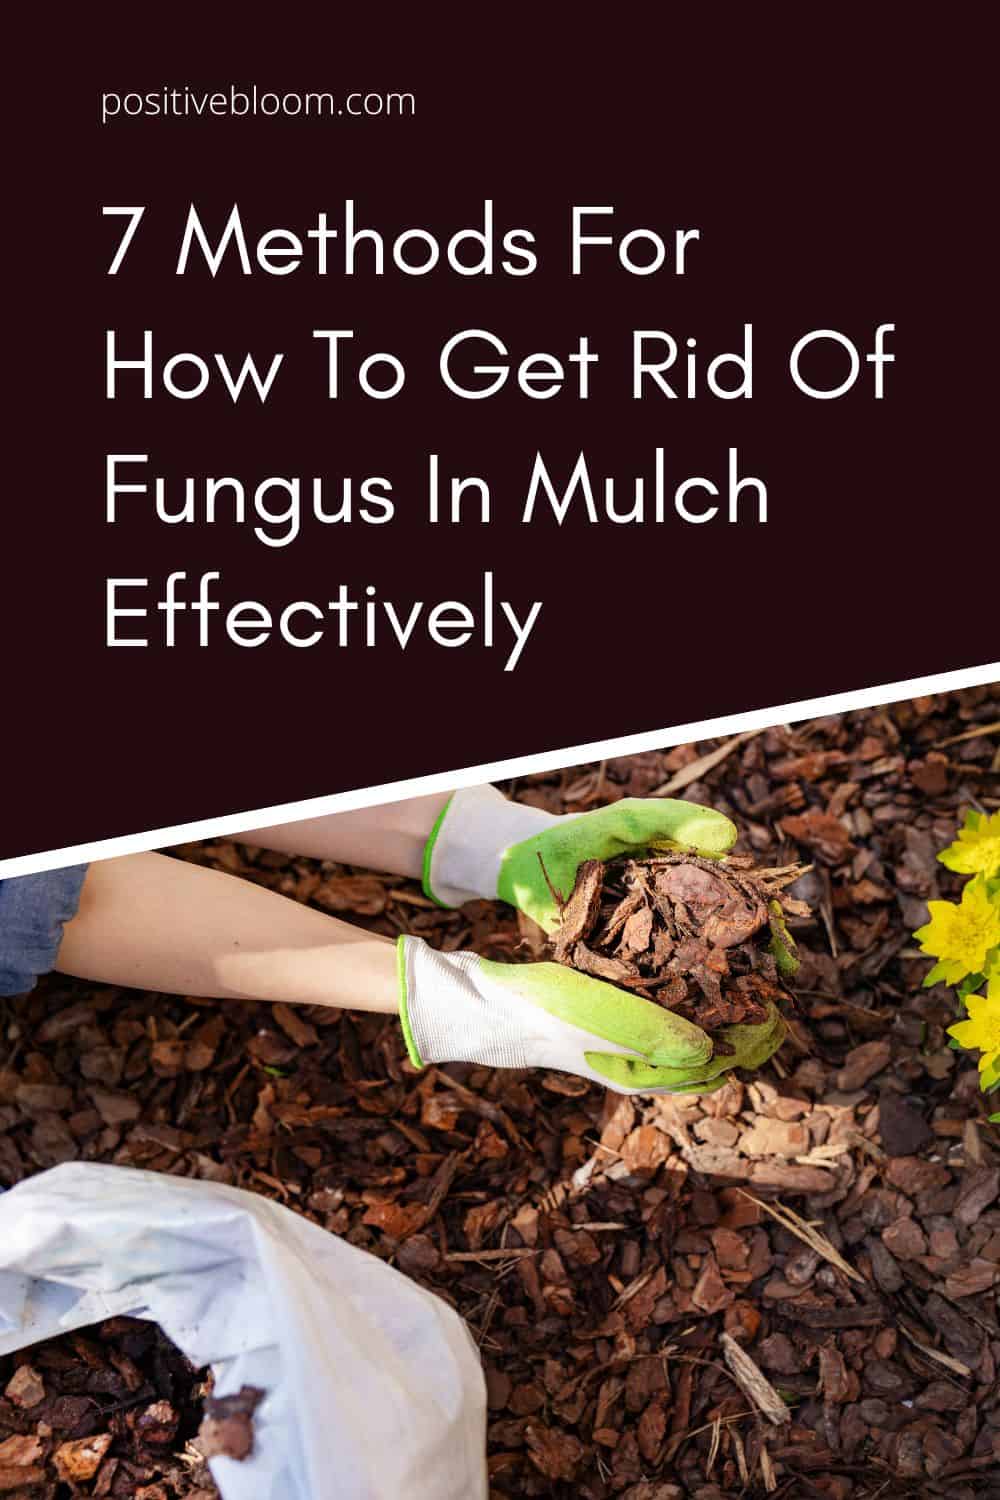 7 Methods For How To Get Rid Of Fungus In Mulch Effectively Pinterest